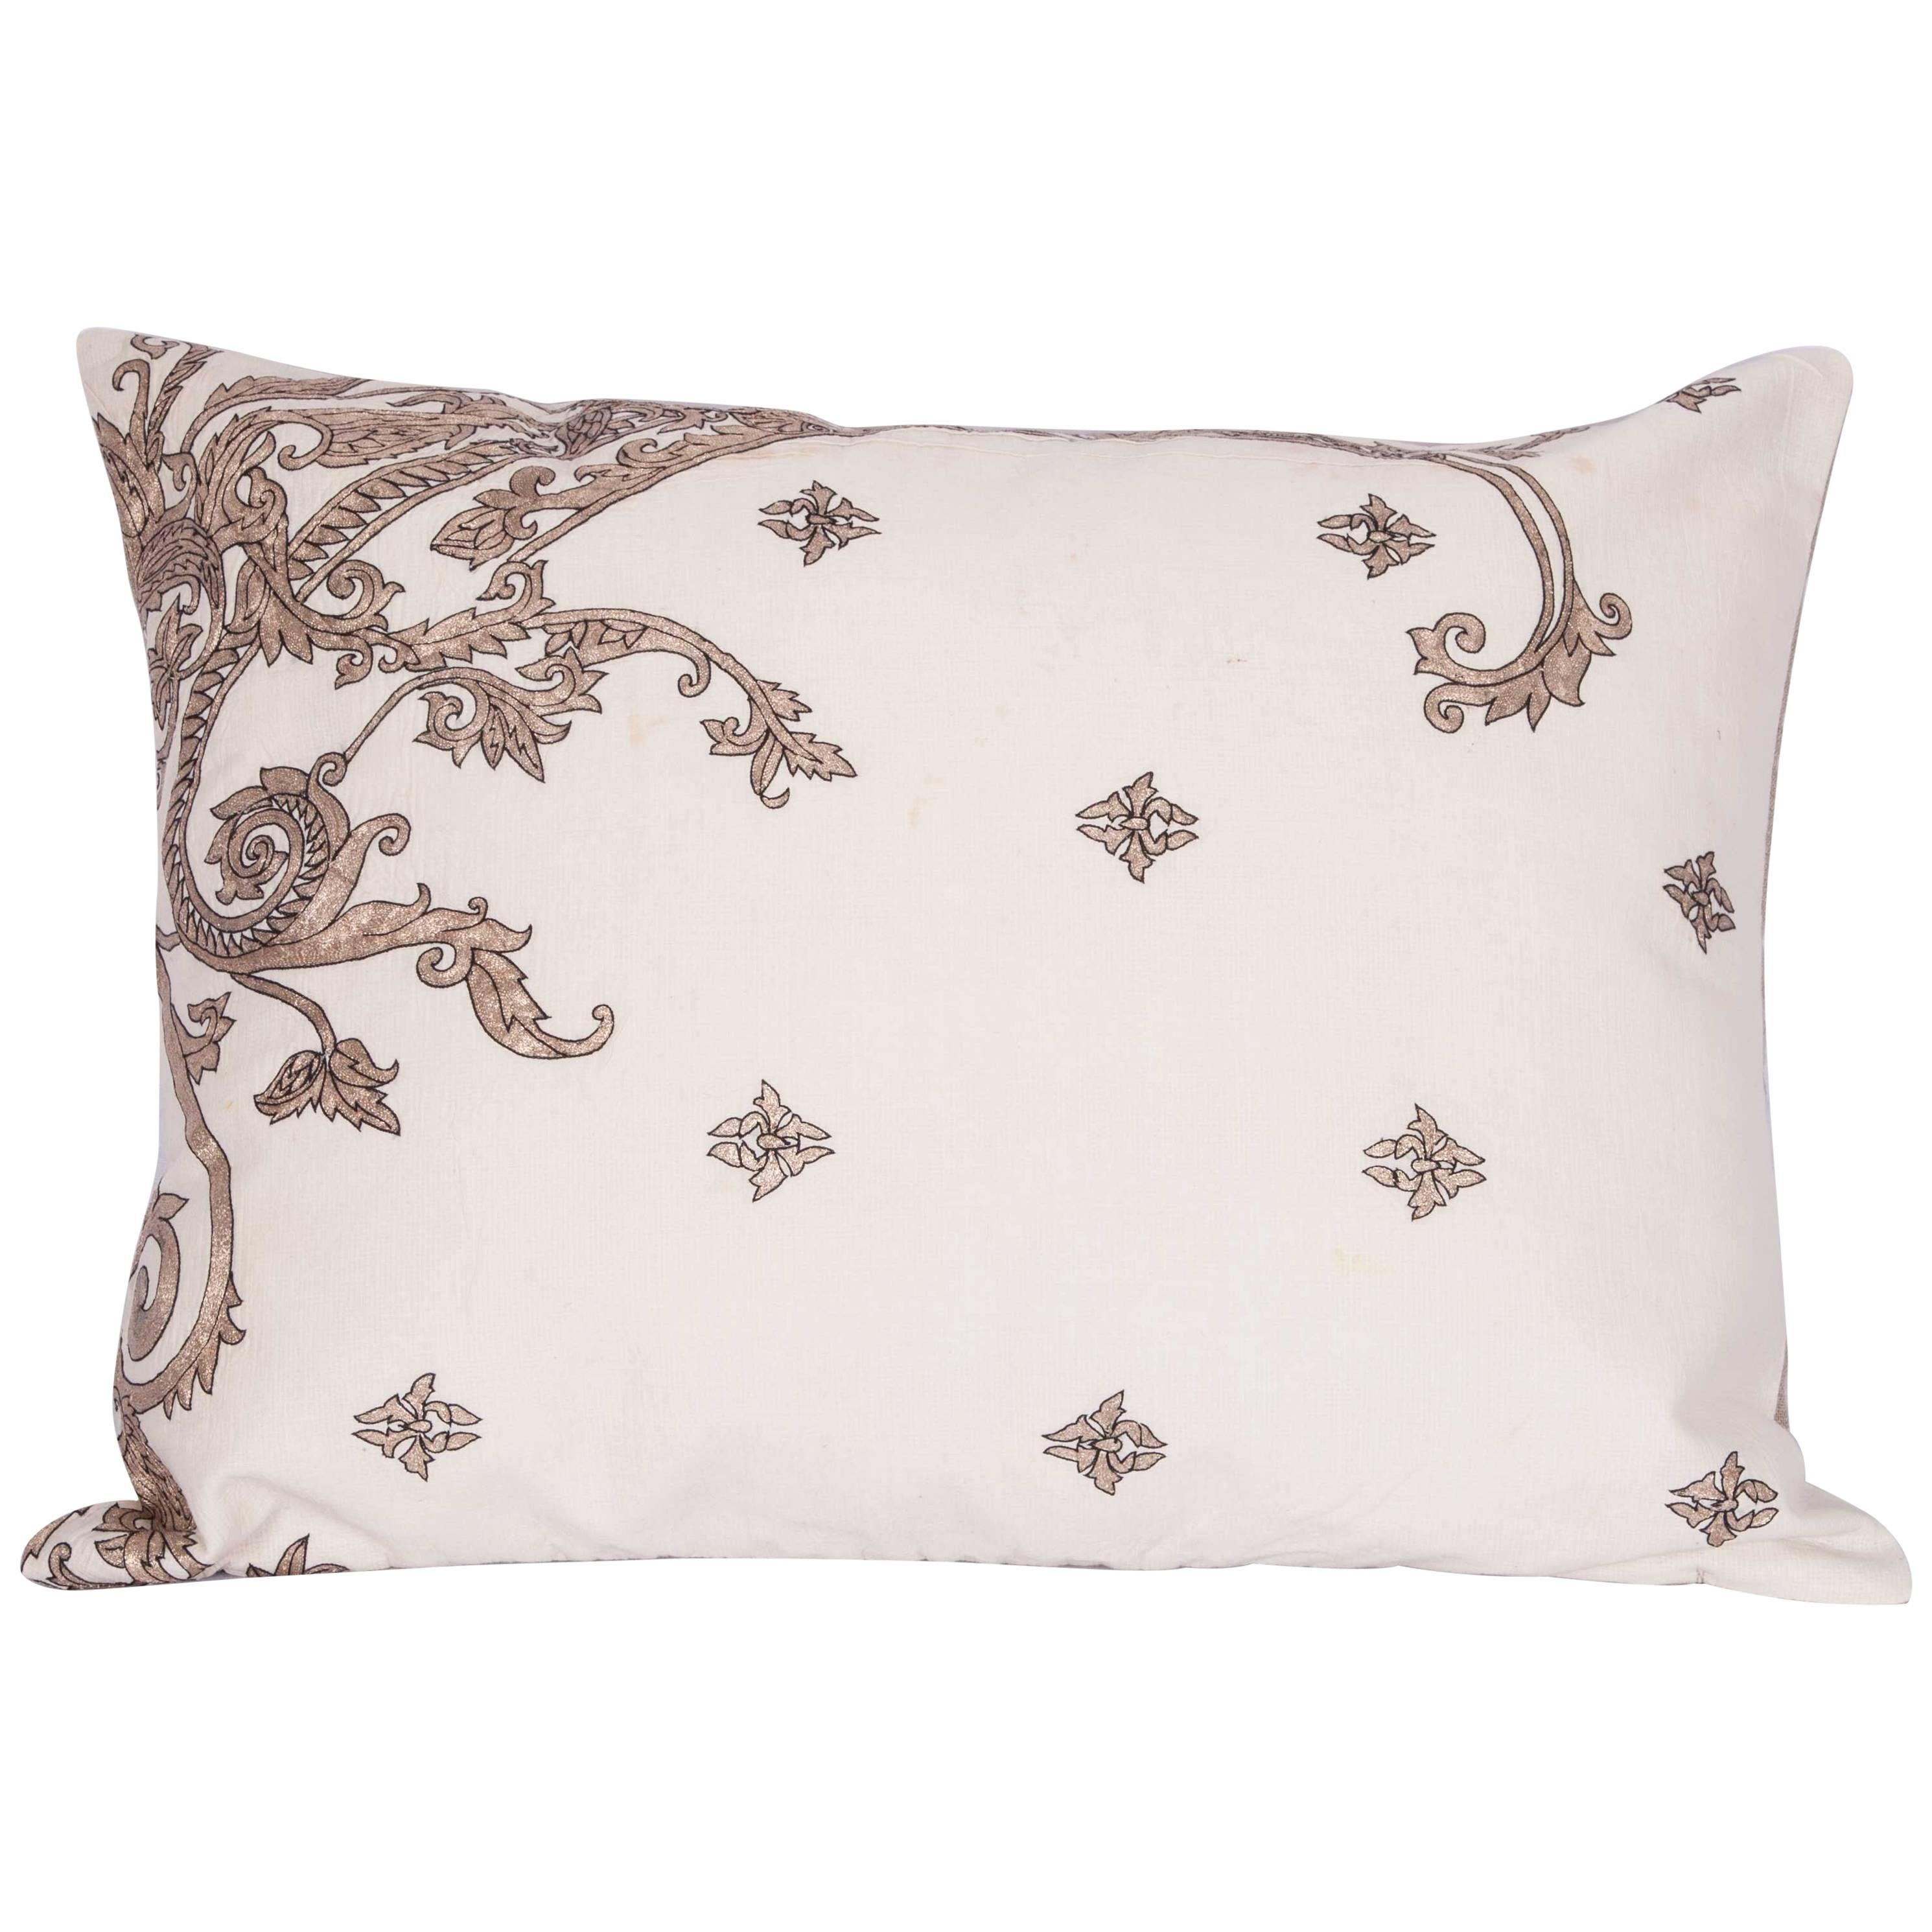 Antique Pillow Made Out of a 19th century or Earlier European Silver Embroidery For Sale